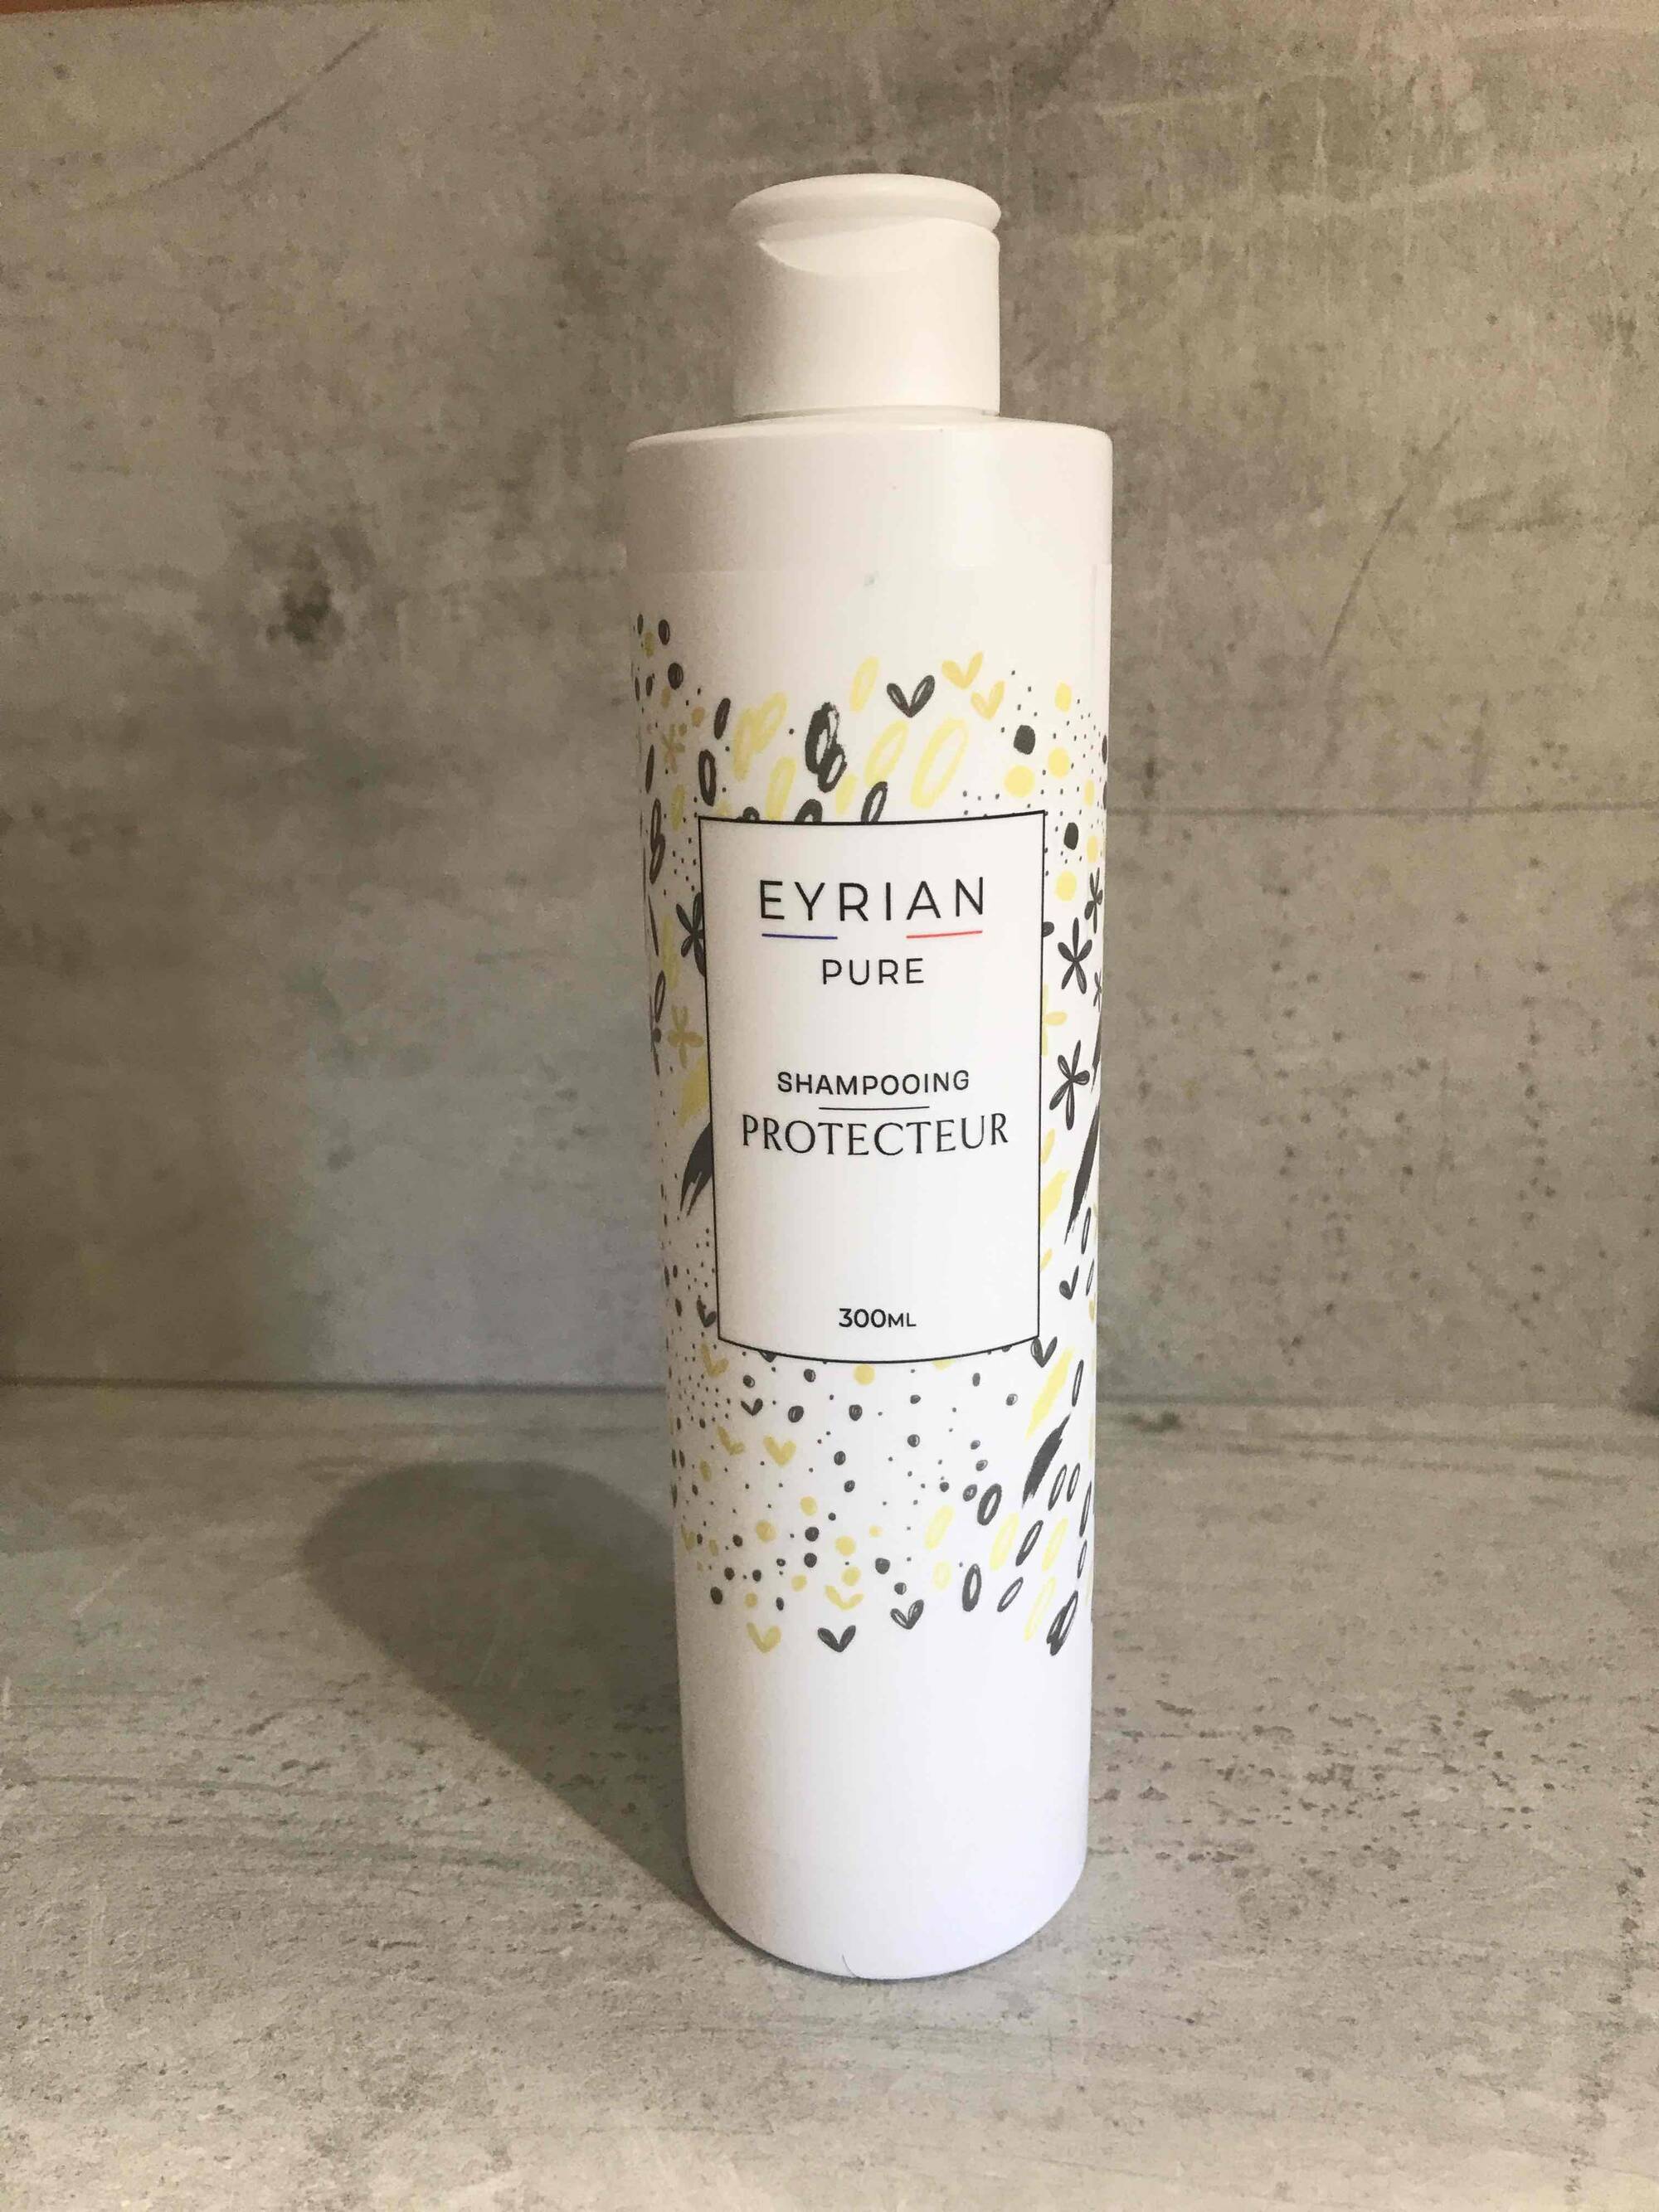 EYRIAN - Pure - Shampooing protecteur